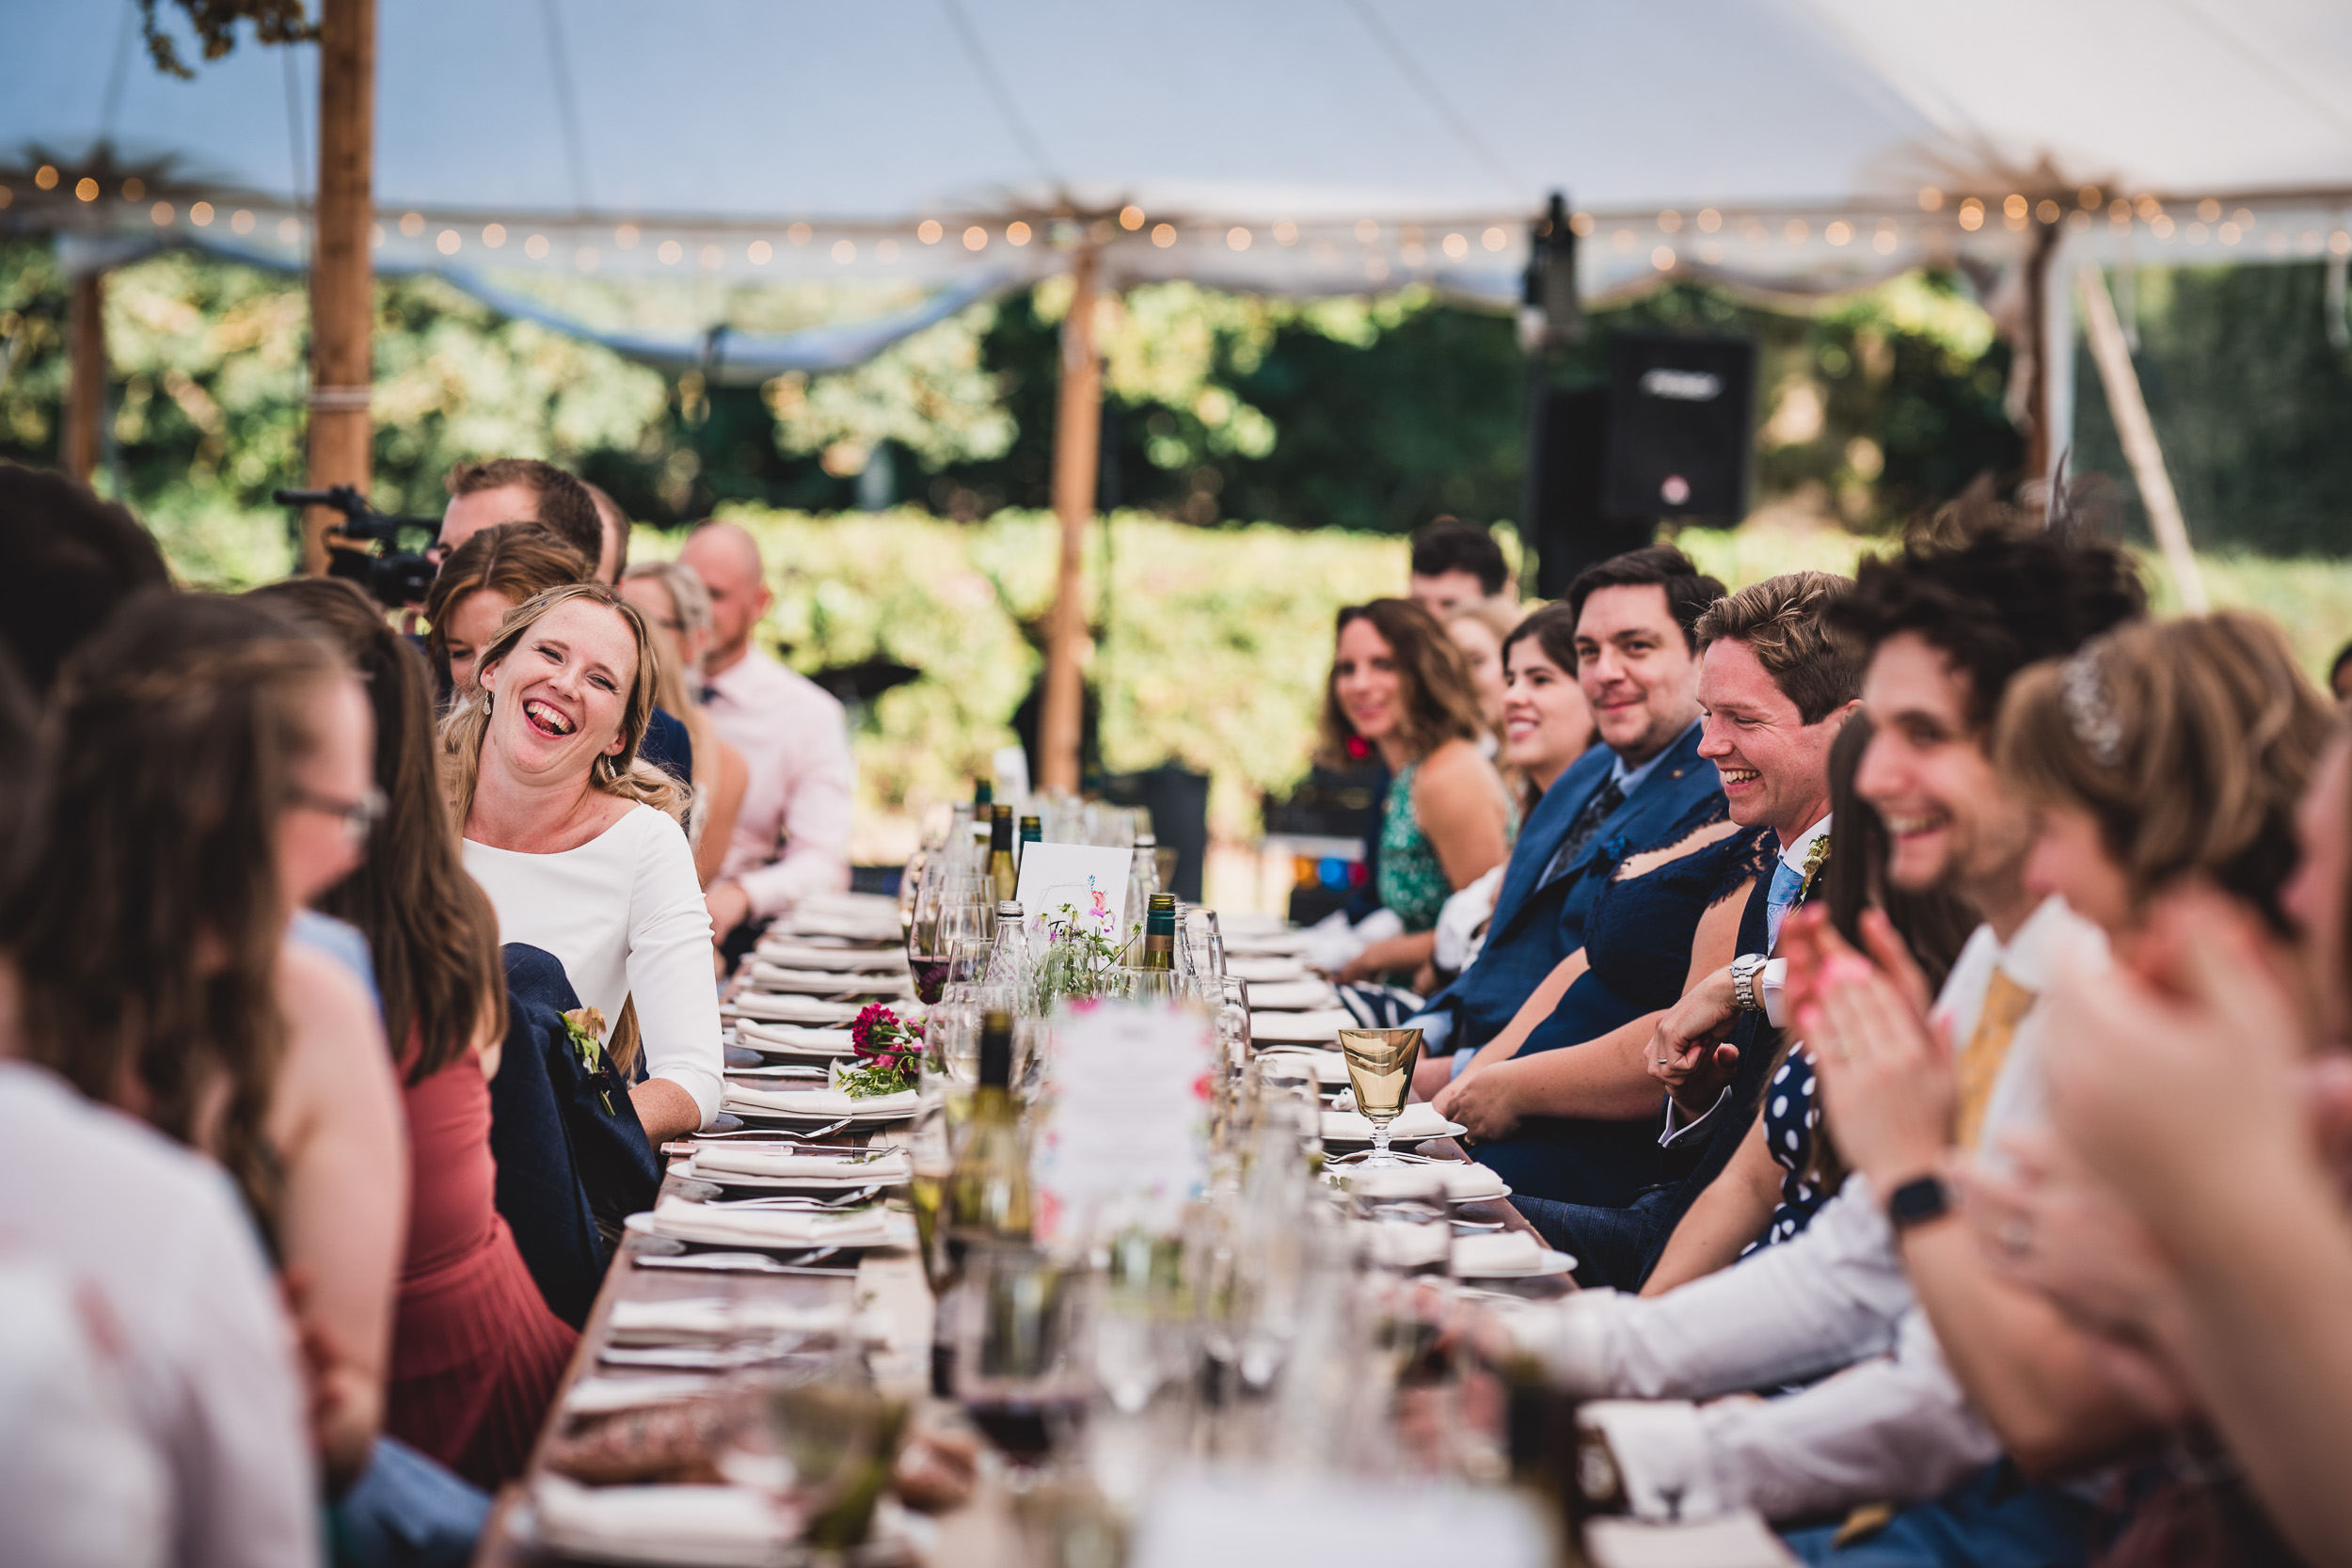 A wedding photo capturing the groom and bride along with their guests sitting at a long table in a tent.